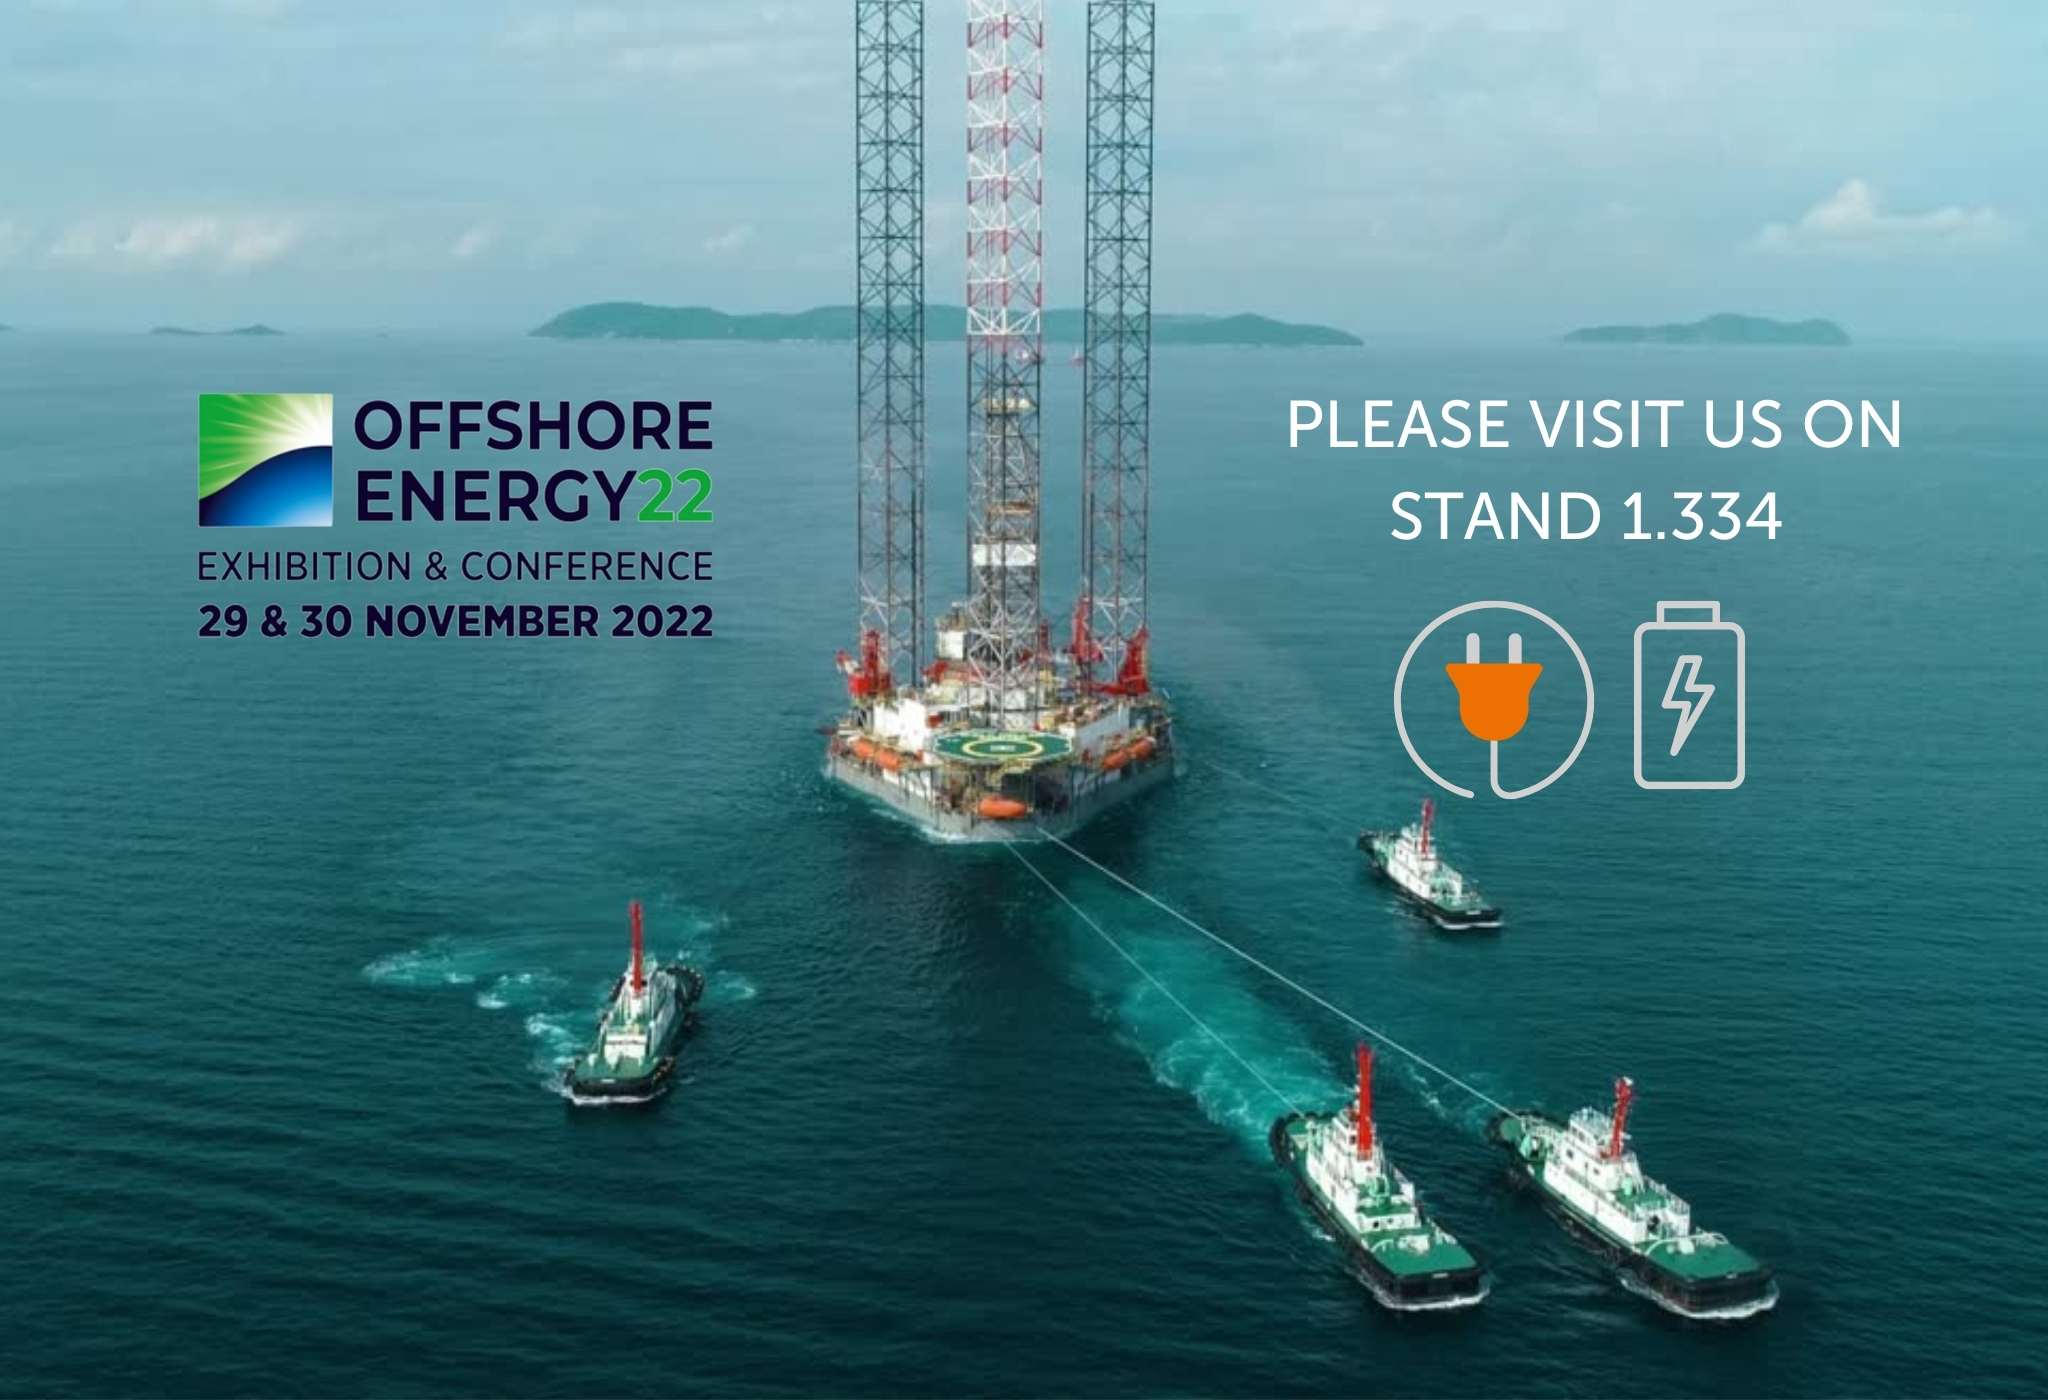 offshore-energy-2022-electrical-system-integrator-royal-van-der-leun-booth-1334-hybrid-solutions-ng3-shorepower-ems-ams-rai-amsterdam-electrical-systems-3-